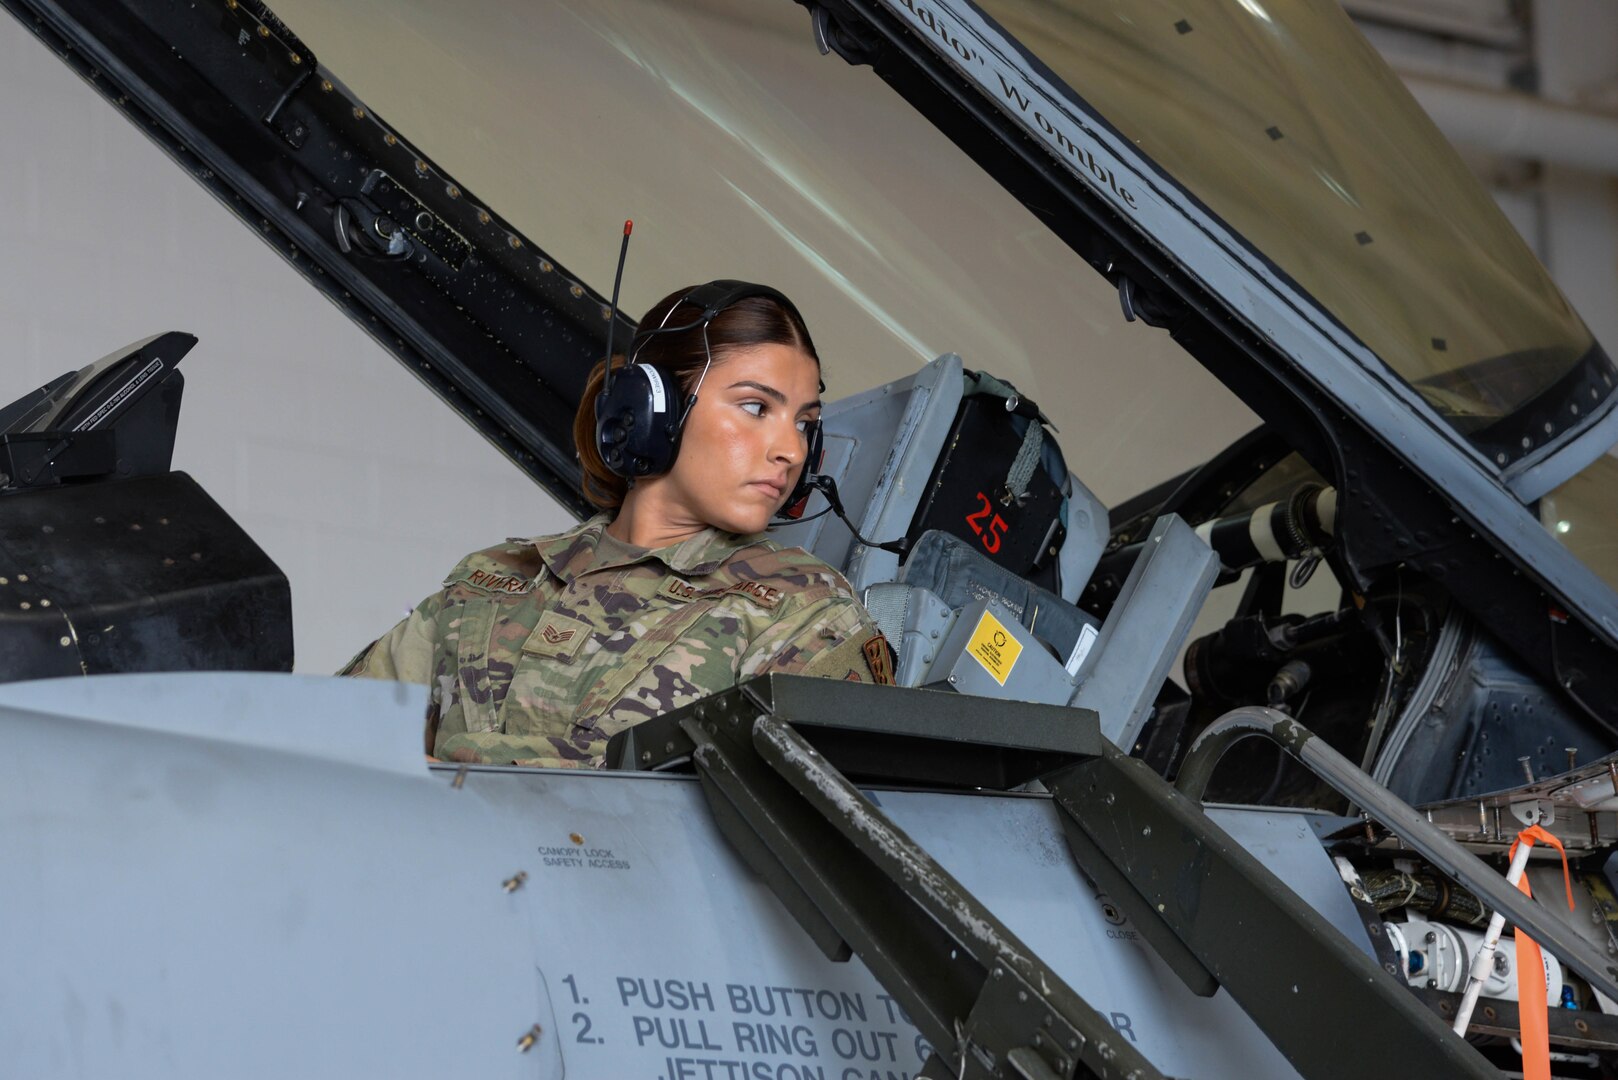 Staff Sgt. Tatiana Rivera, noncommissioned officer in charge with the 177th Force Support Squadron, participates in the Maintainer for a Day program hosted by the 177th Maintenance Squadron June 24, 2022, at the 177th Fighter Wing, Egg Harbor Township, New Jersey. The program provided non-aircraft maintenance Airmen with hands-on experience in the aircraft maintenance career field working on F-16 fighter jets.